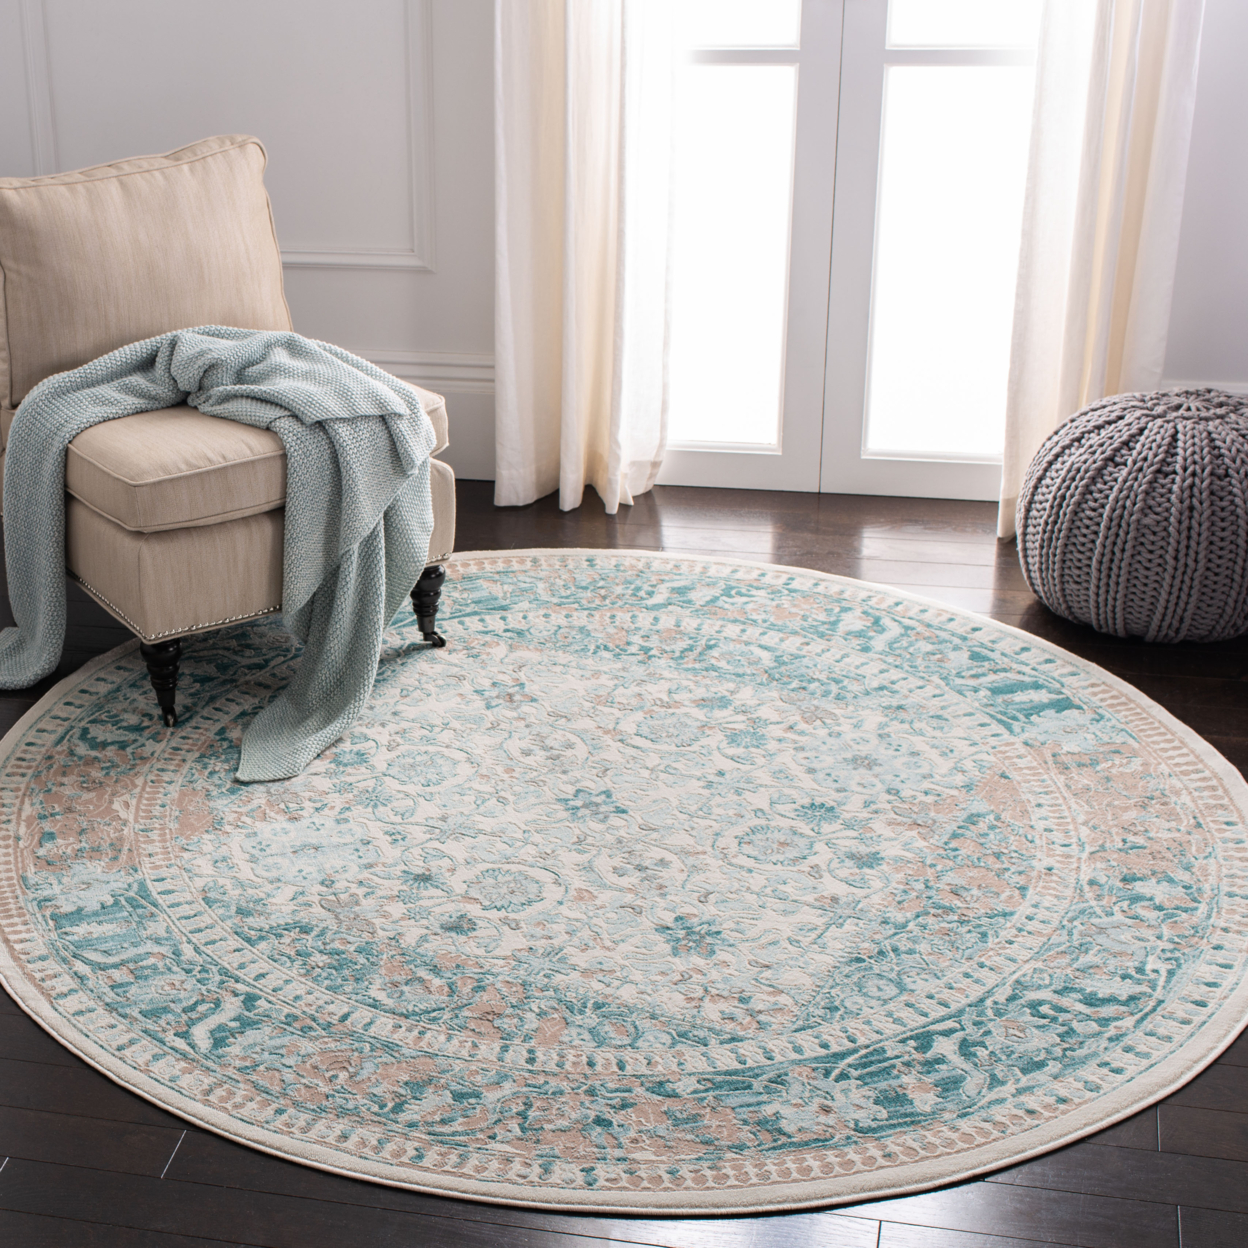 SAFAVIEH Passion Collection PAS405B Turquoise / Ivory Rug - 2' 2 X 8'